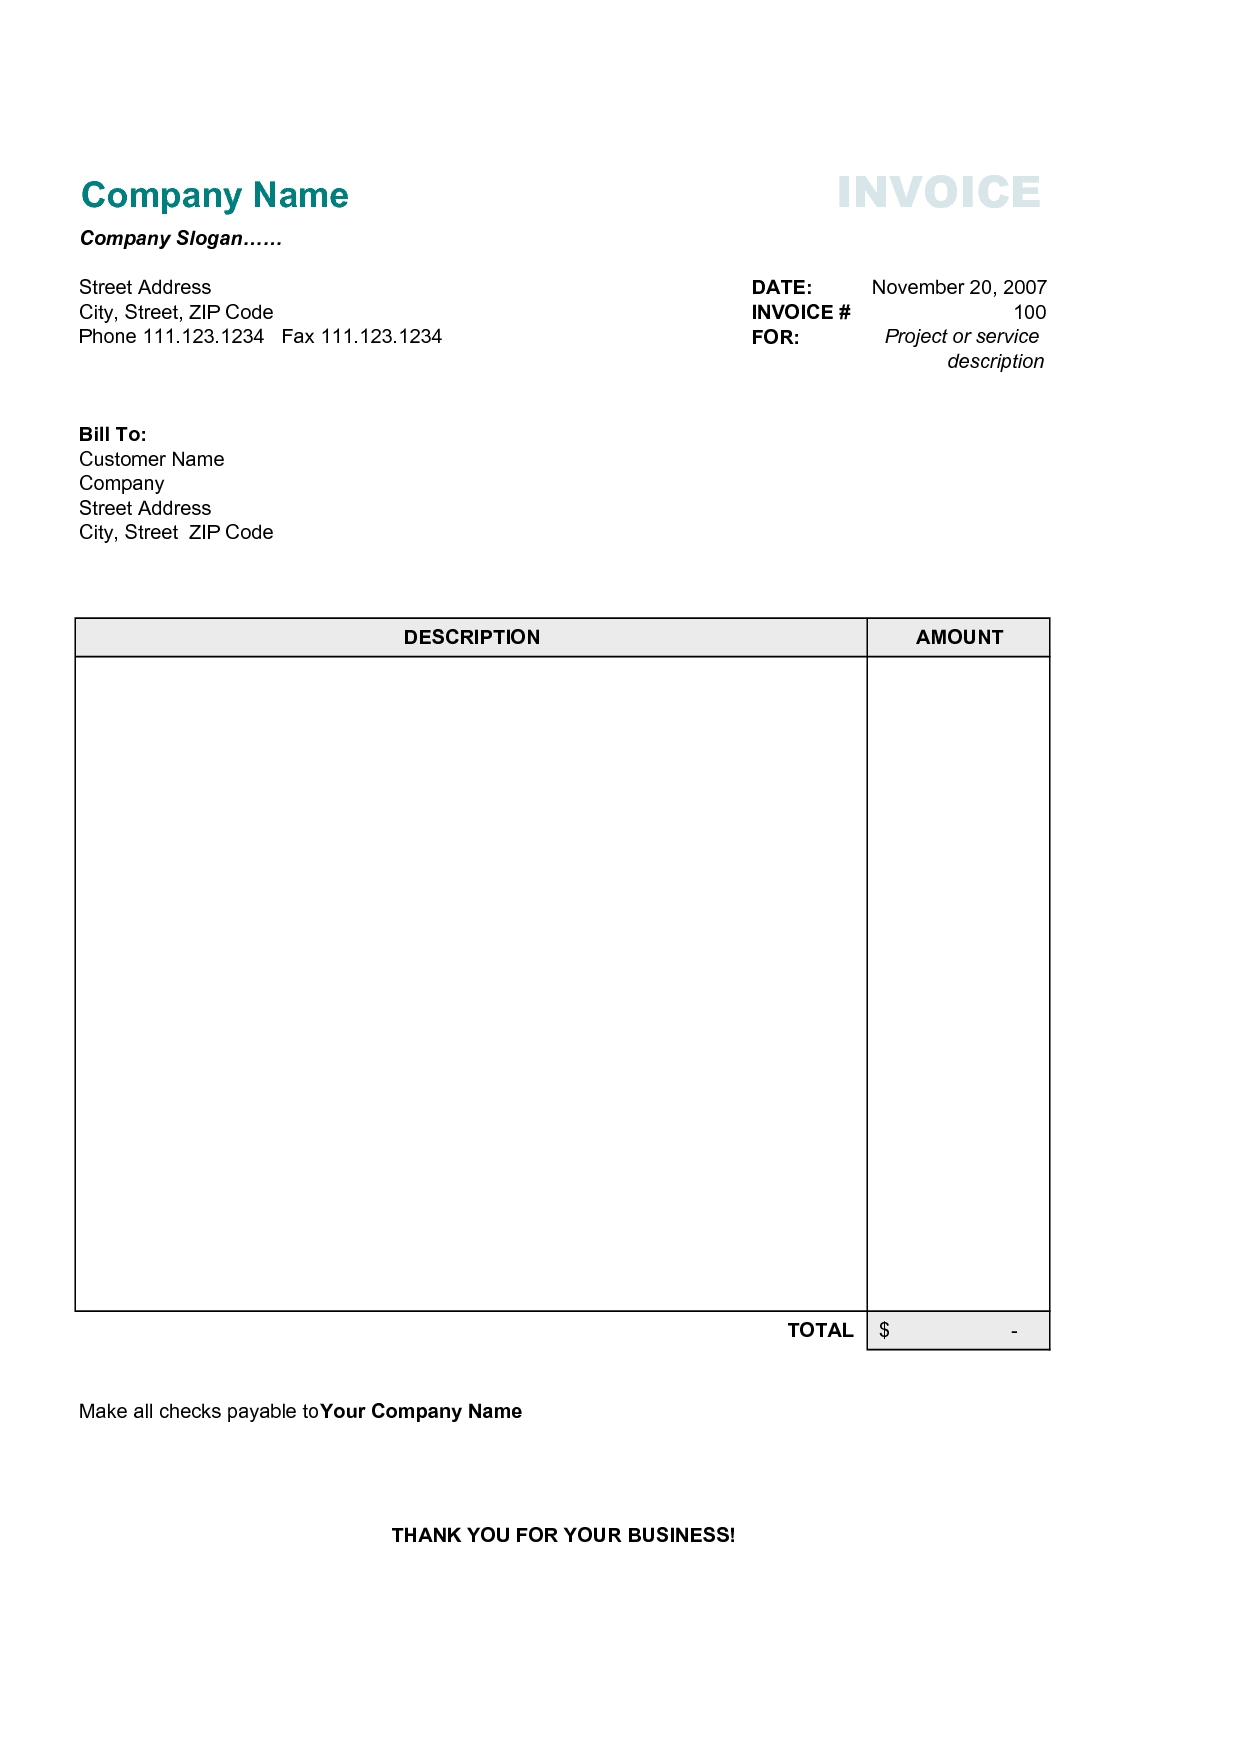 new invoice professional services free download pic